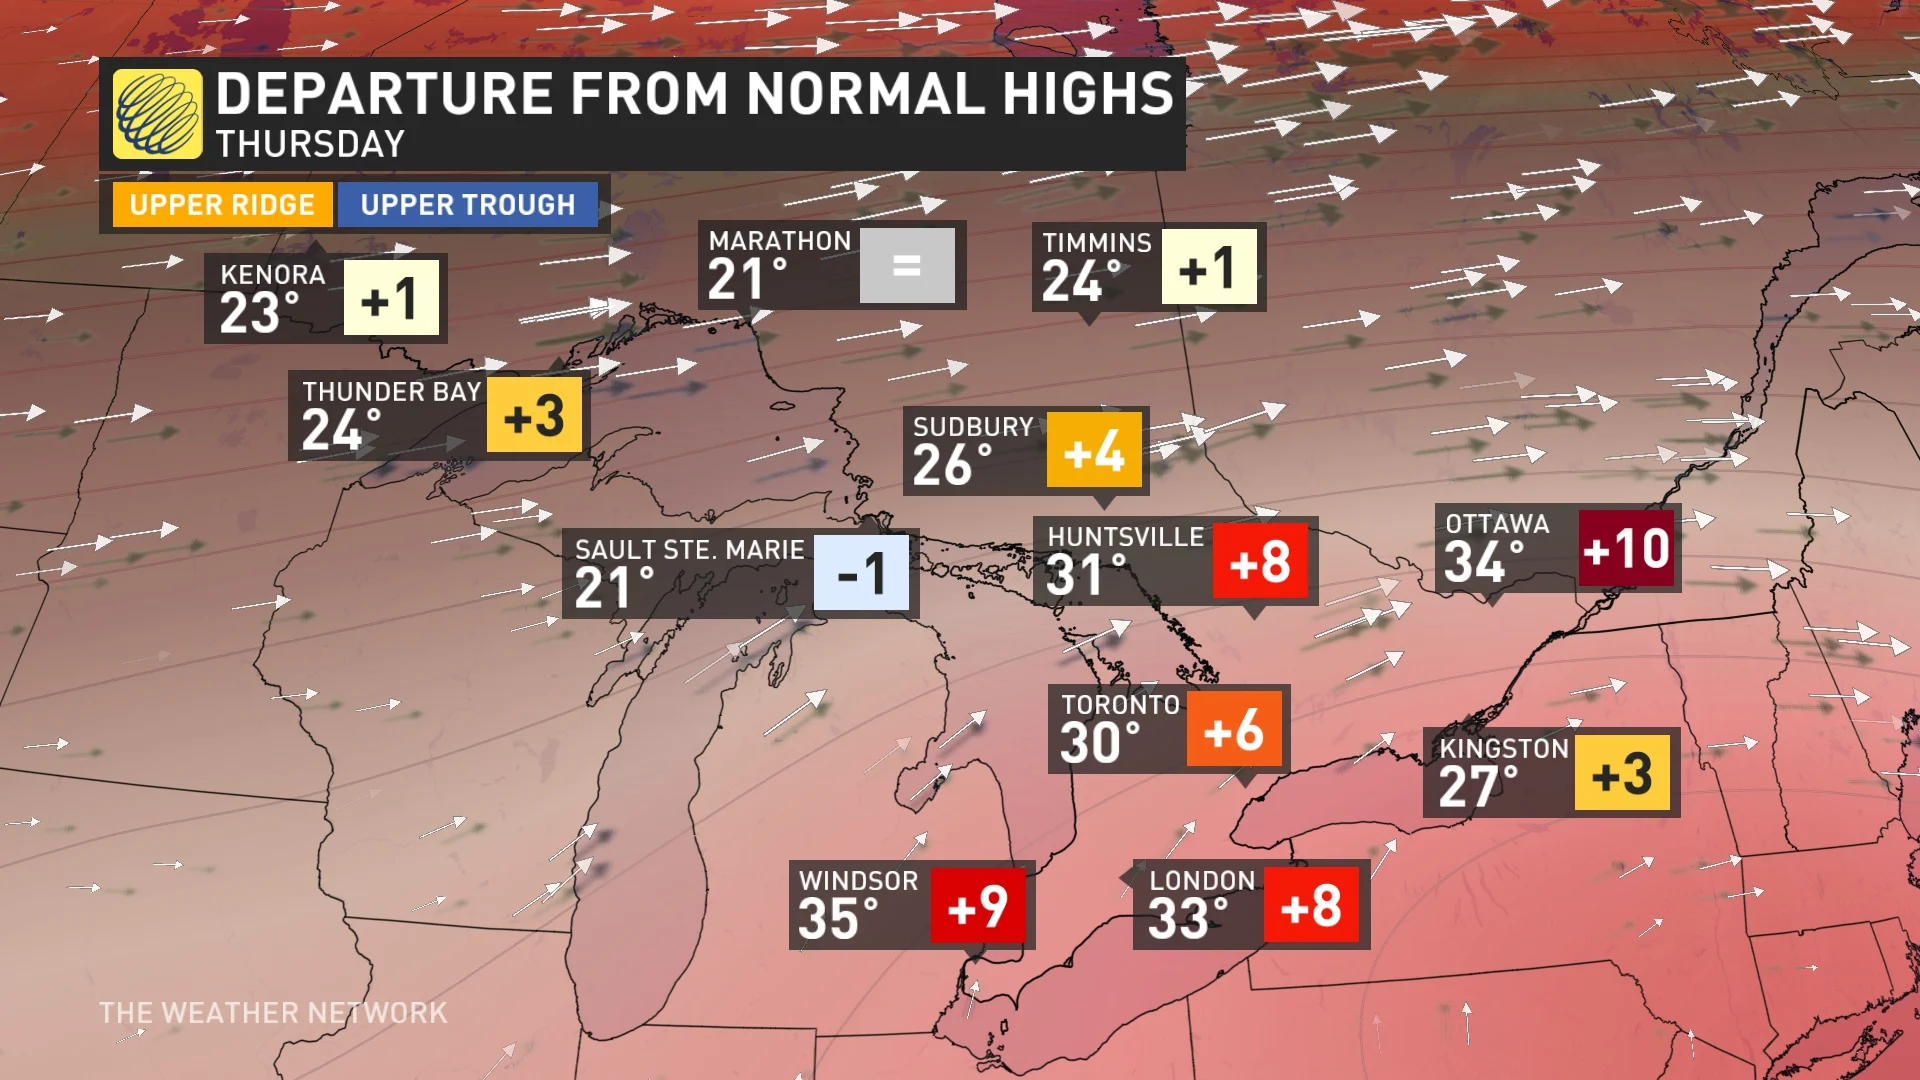 Thursday temp and departures Ontario and Quebec_June 16